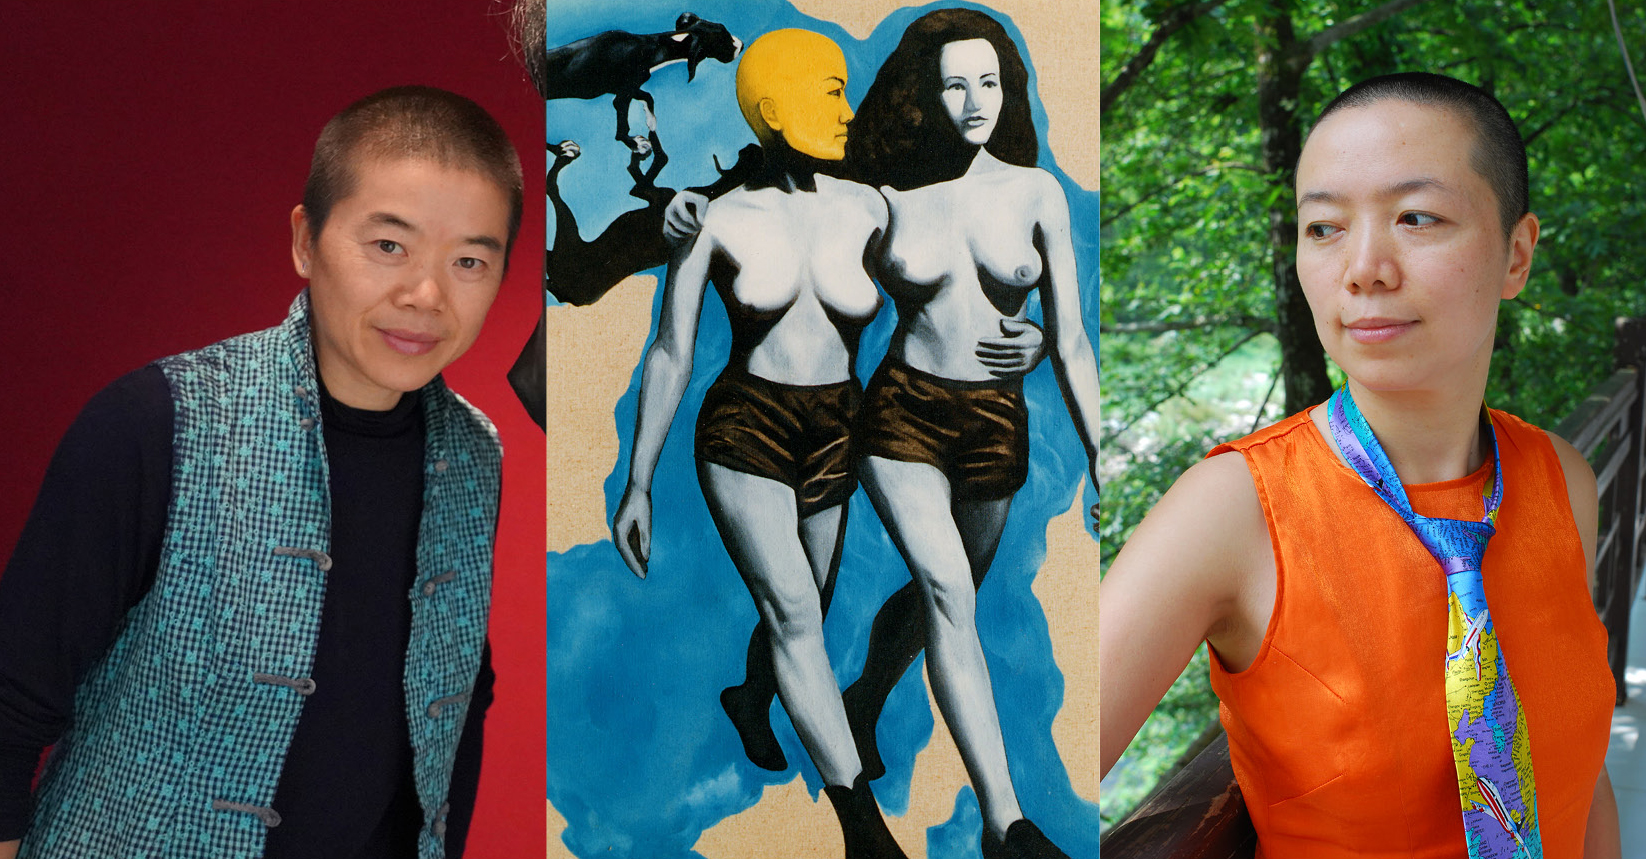 Portrait of the Chinese artists Shitou & Mingming. Between the portraits, a cartoon image of two bare-breasted women walking hand in hand, proud and straight-backed.